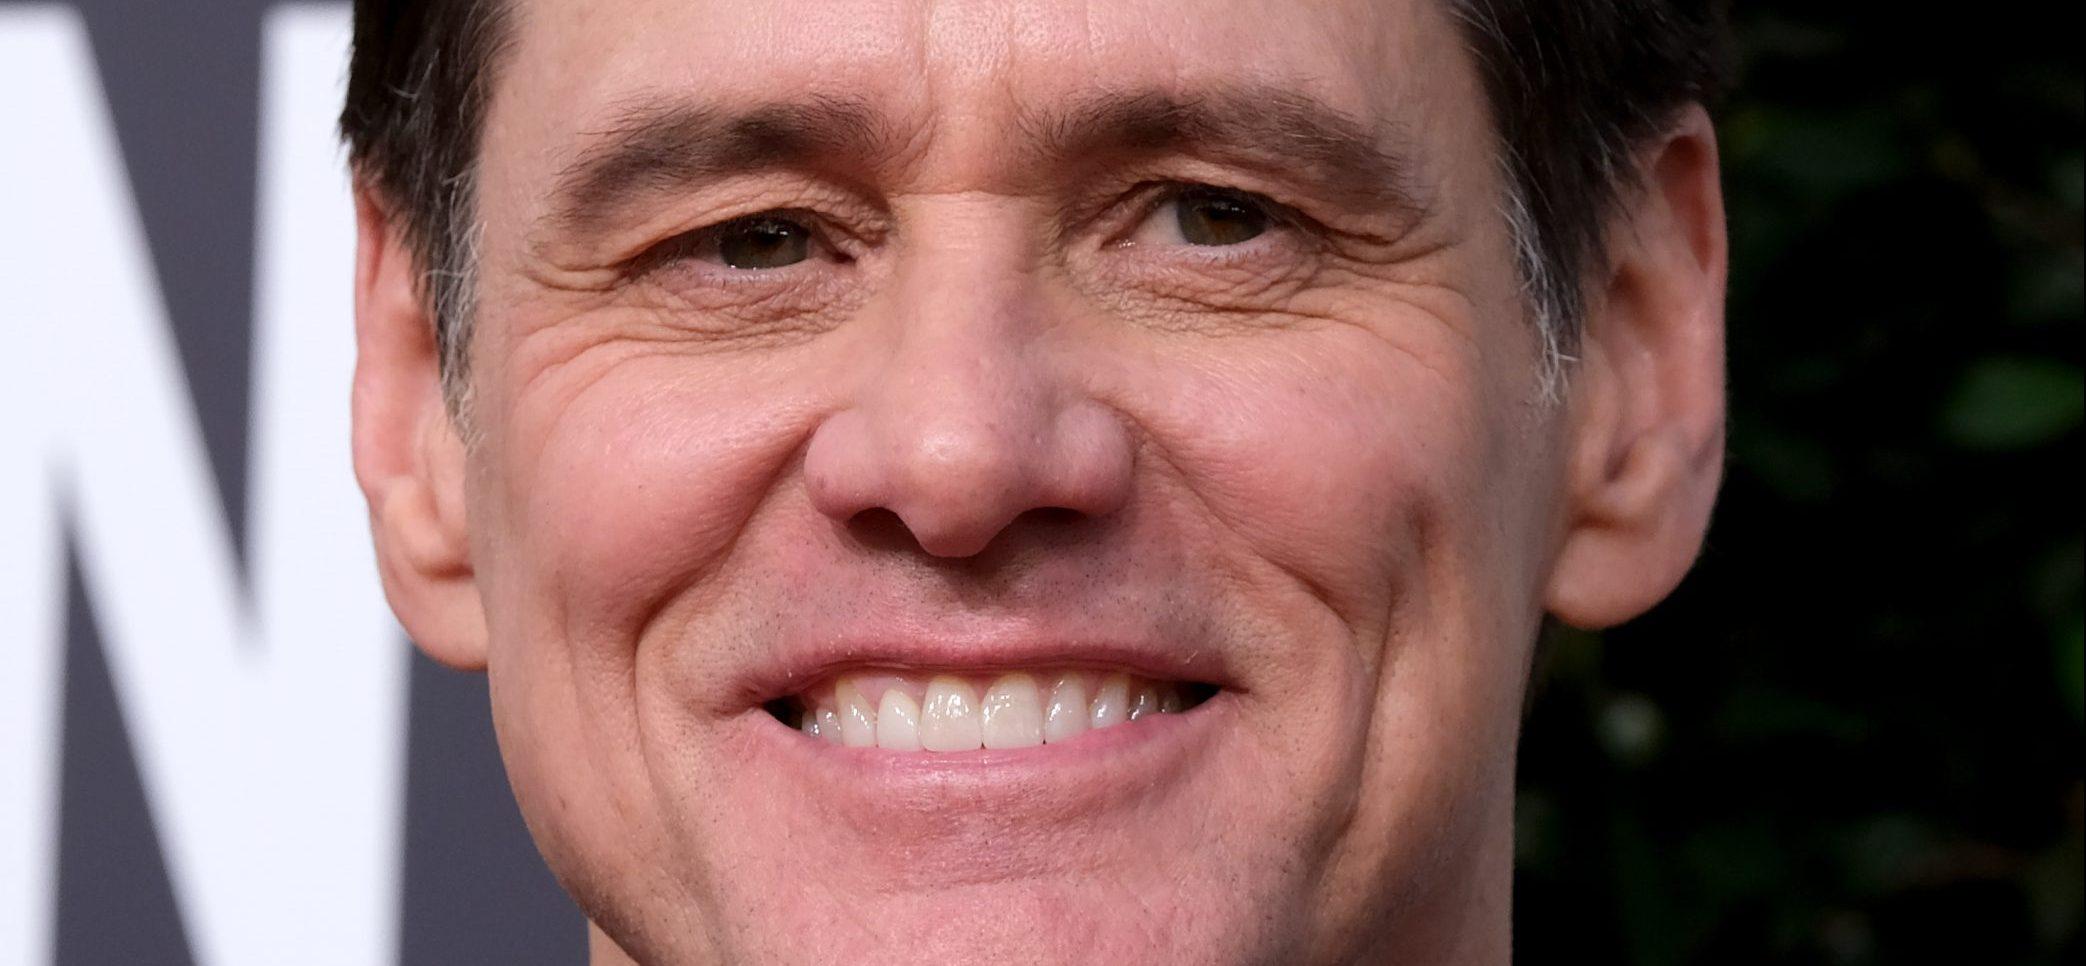 Jim Carrey Is ‘Fairly Serious’ About Retiring: ‘I’m Taking A Break’